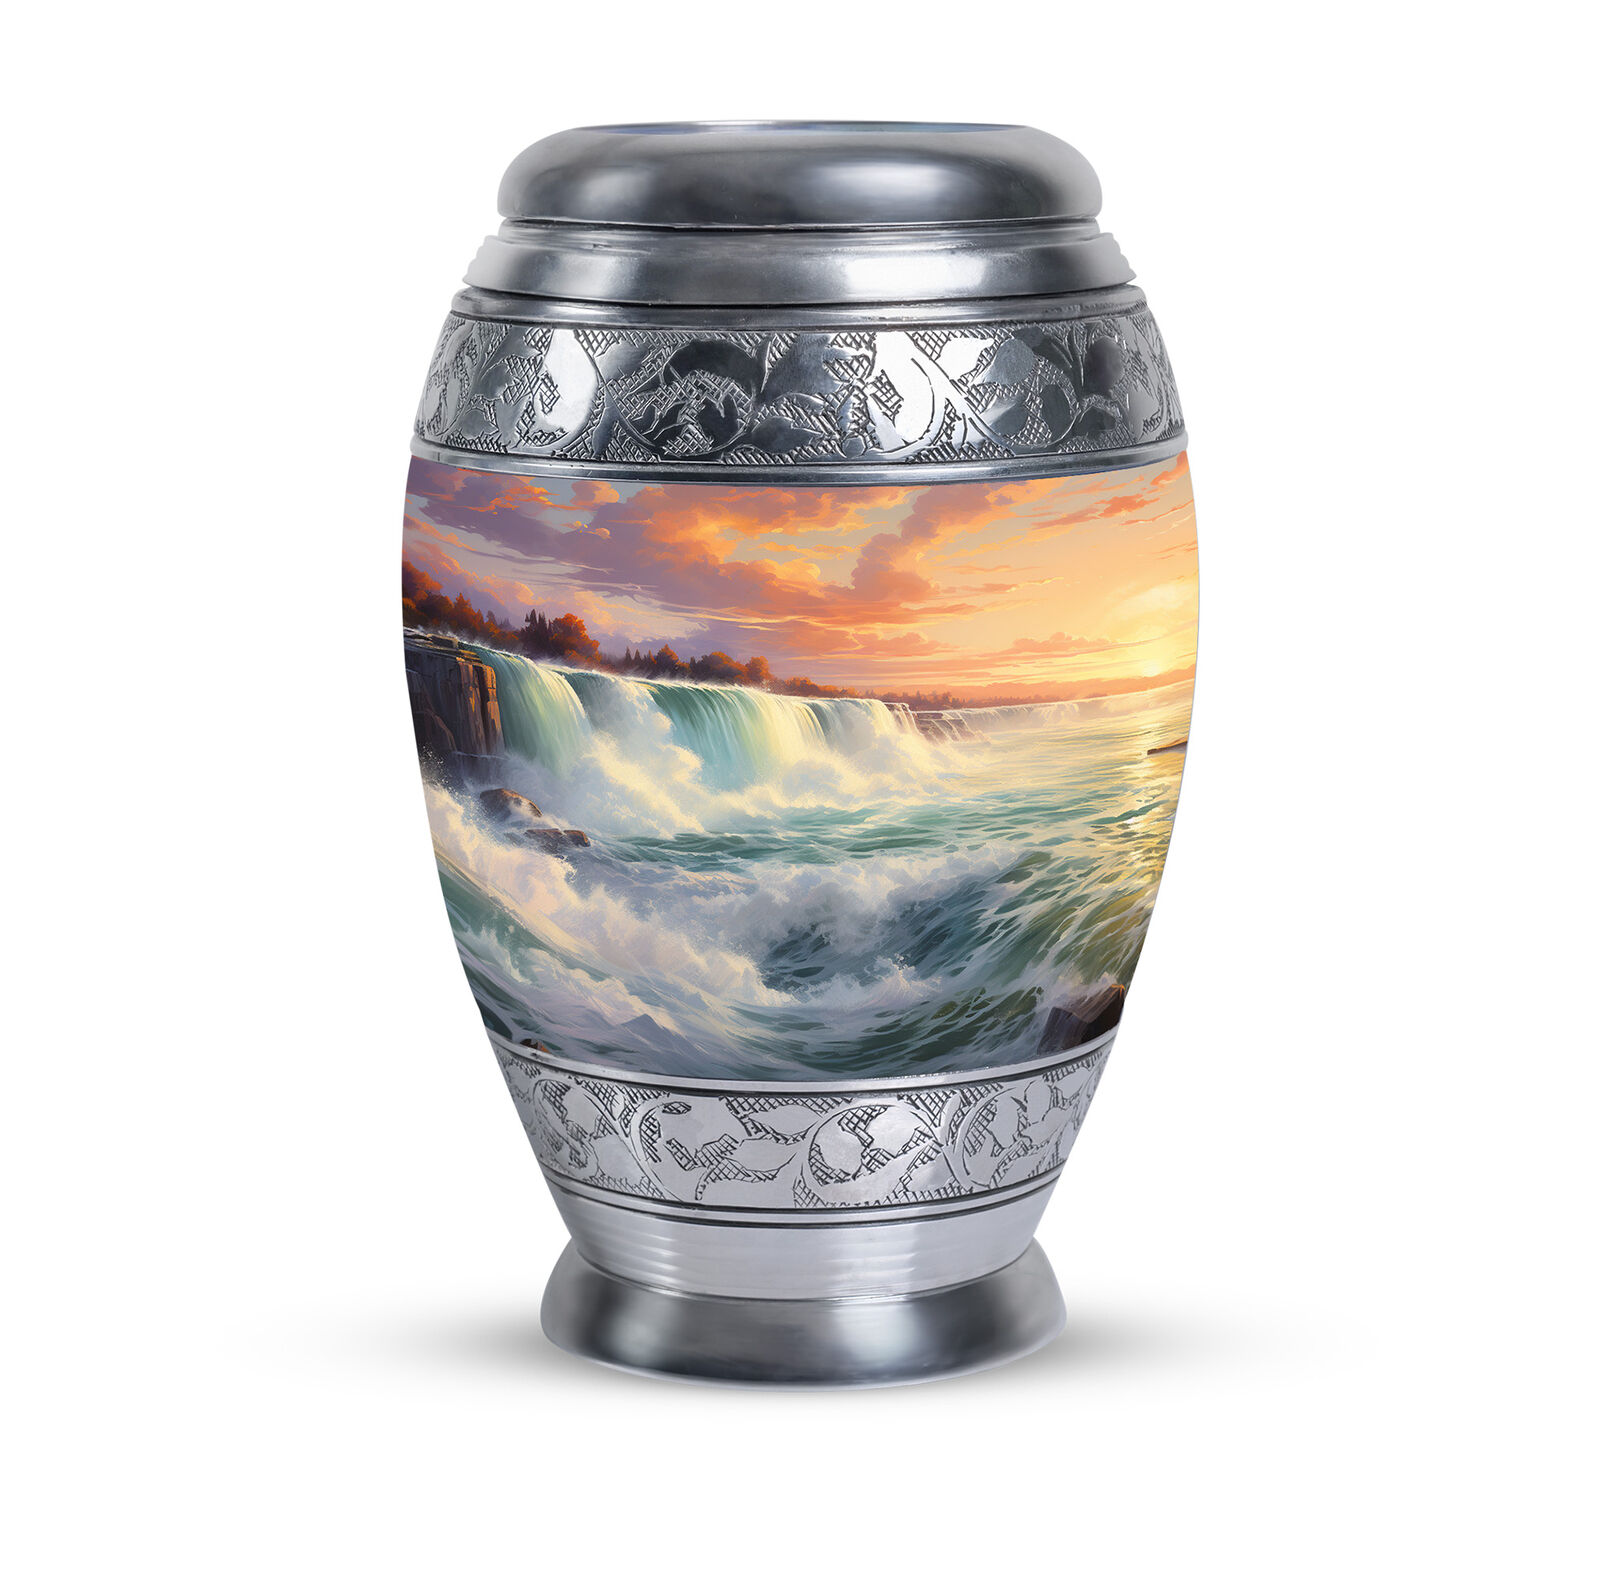 Urns For Men Ashes Adult Male Waterfall At Sunset (10 Inch) Large Urn